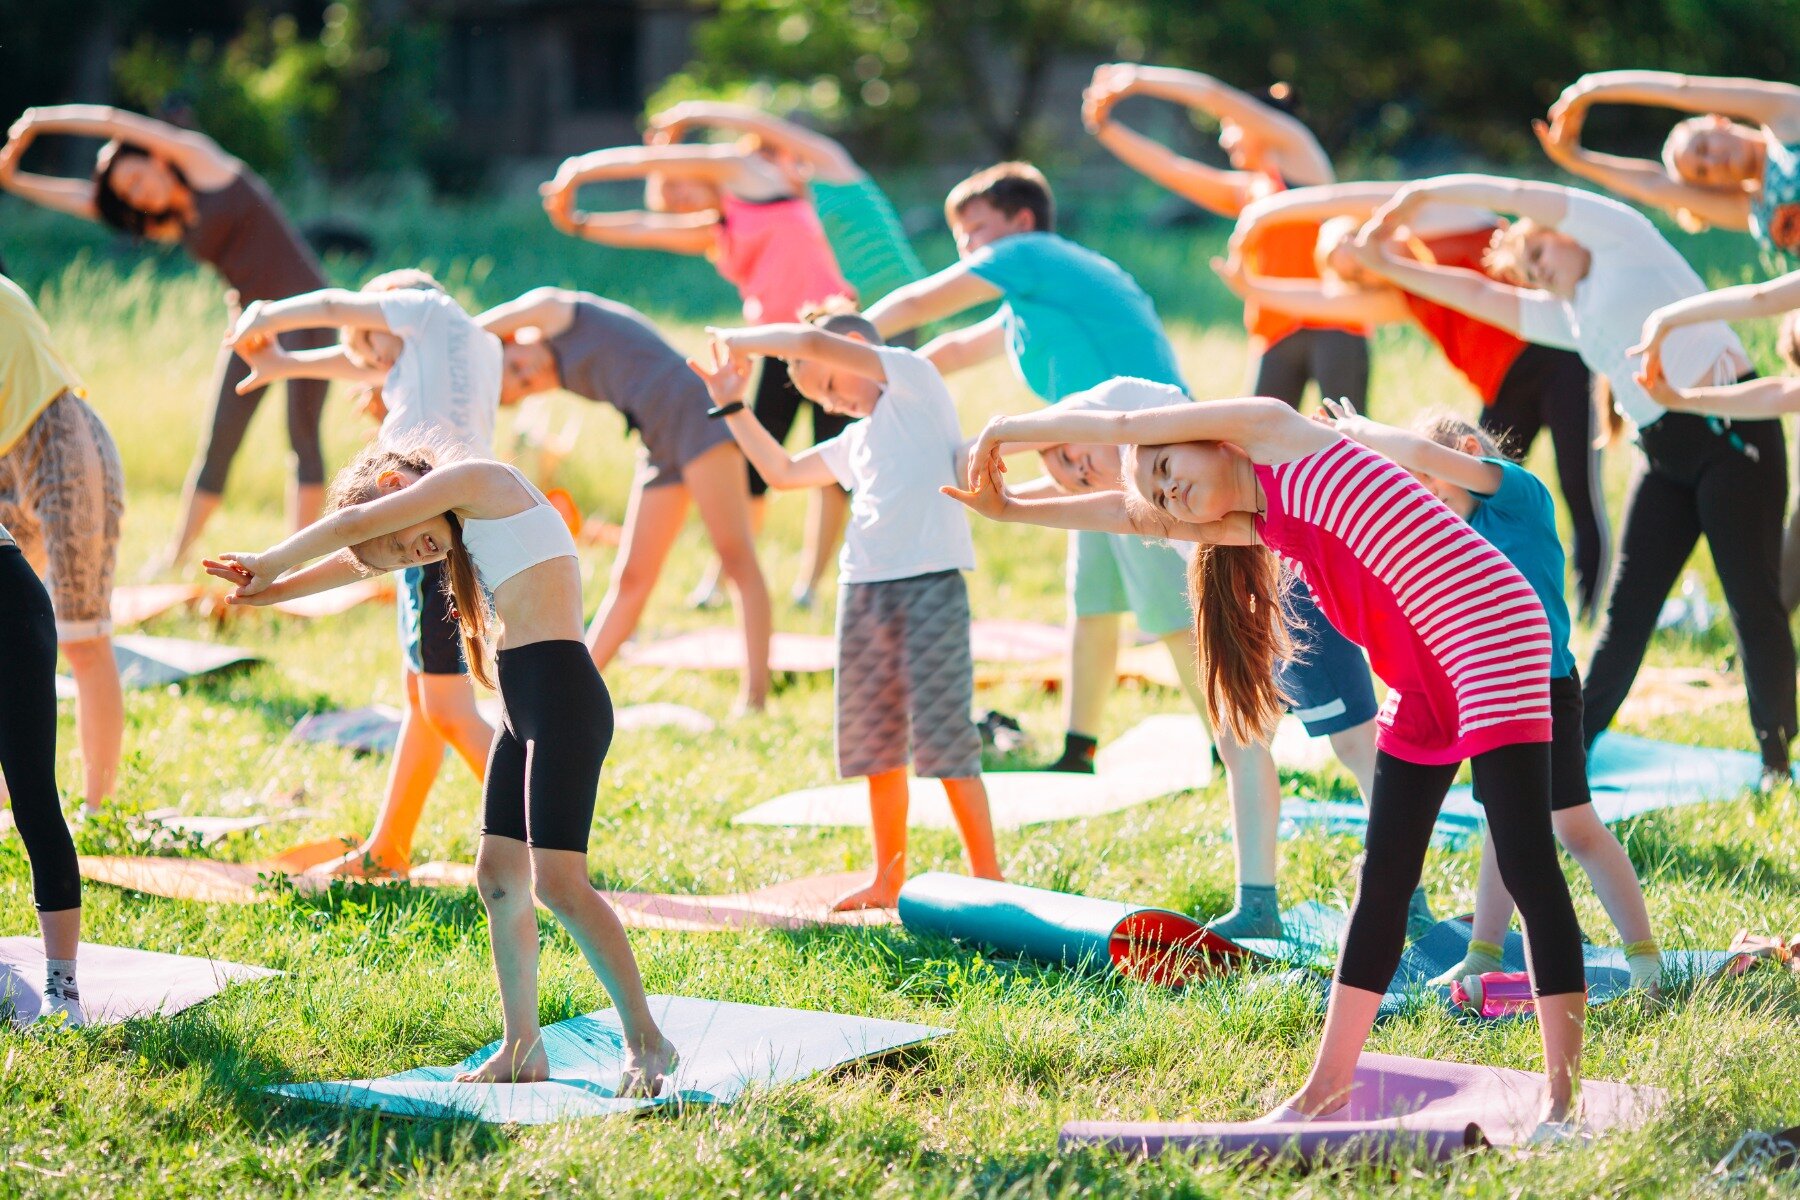 Yoga is not just for adults! In fact, it can give children very important life skills that can help them succeed in the world, and at Heart Festival we have some wonderful fun yoga teachers ready to inspire the kids!

So to inspire you to bring the w